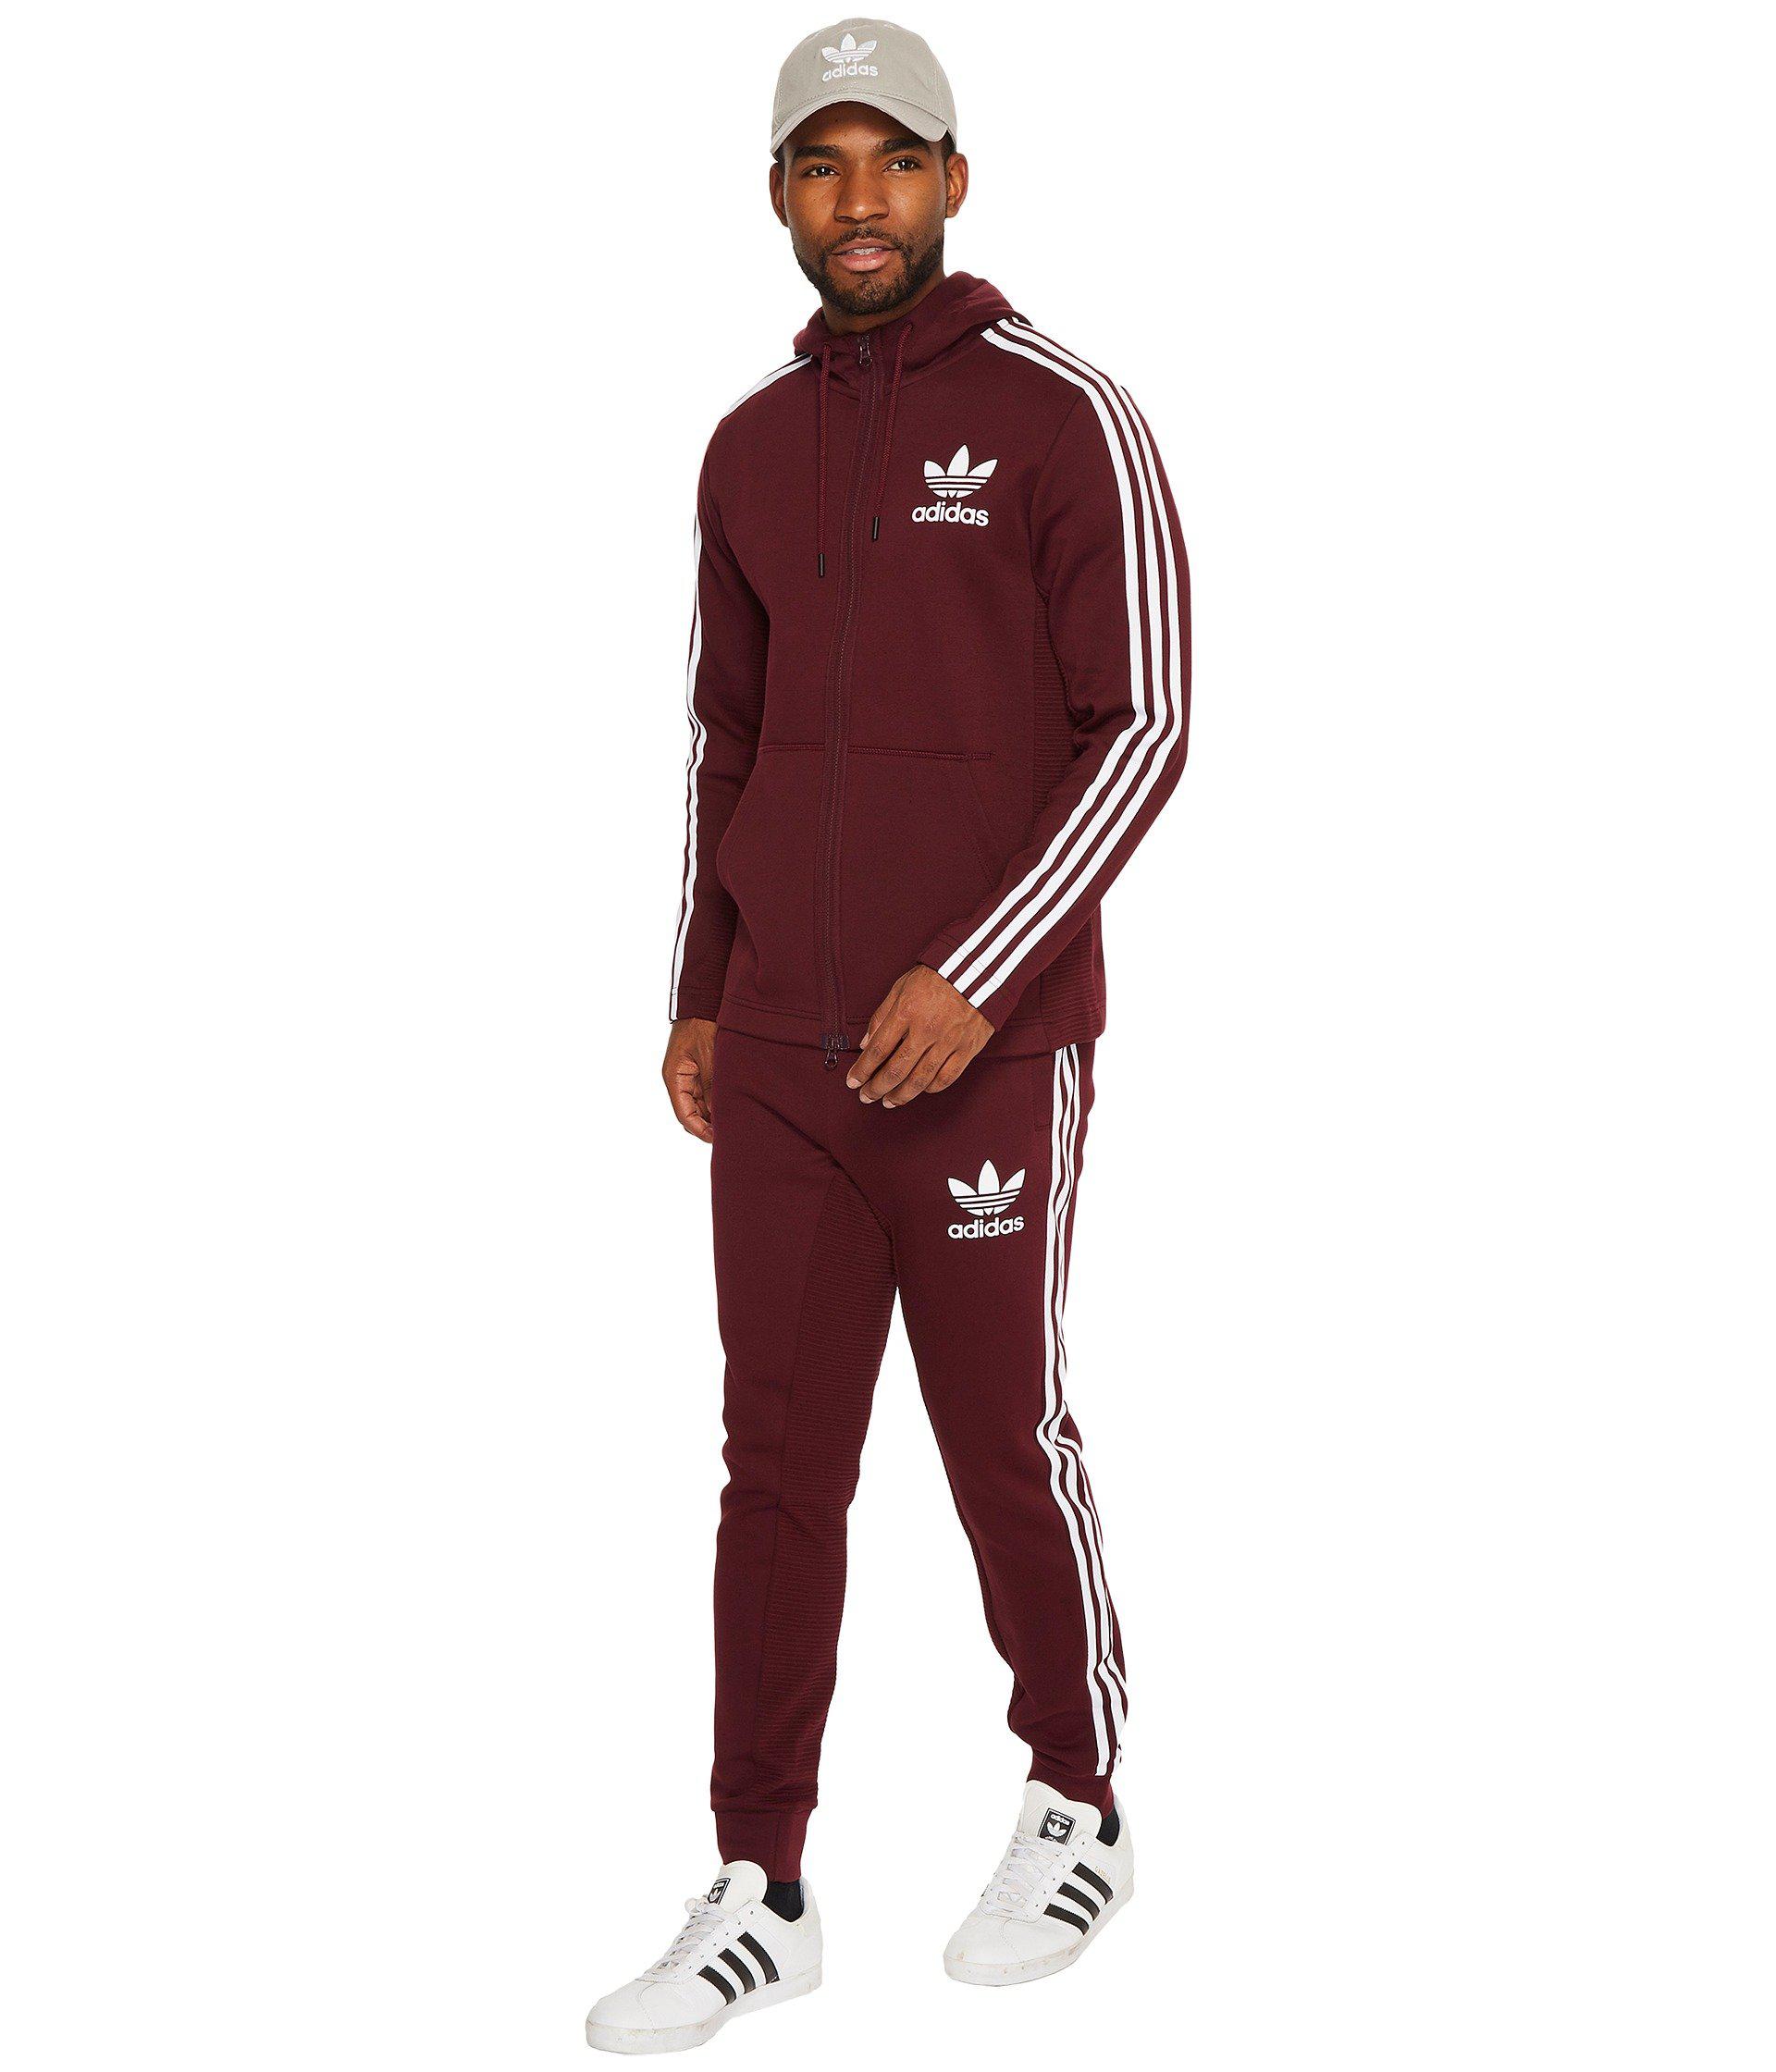 adidas Originals Cotton Curated Pants in Maroon (Red) for Men - Lyst